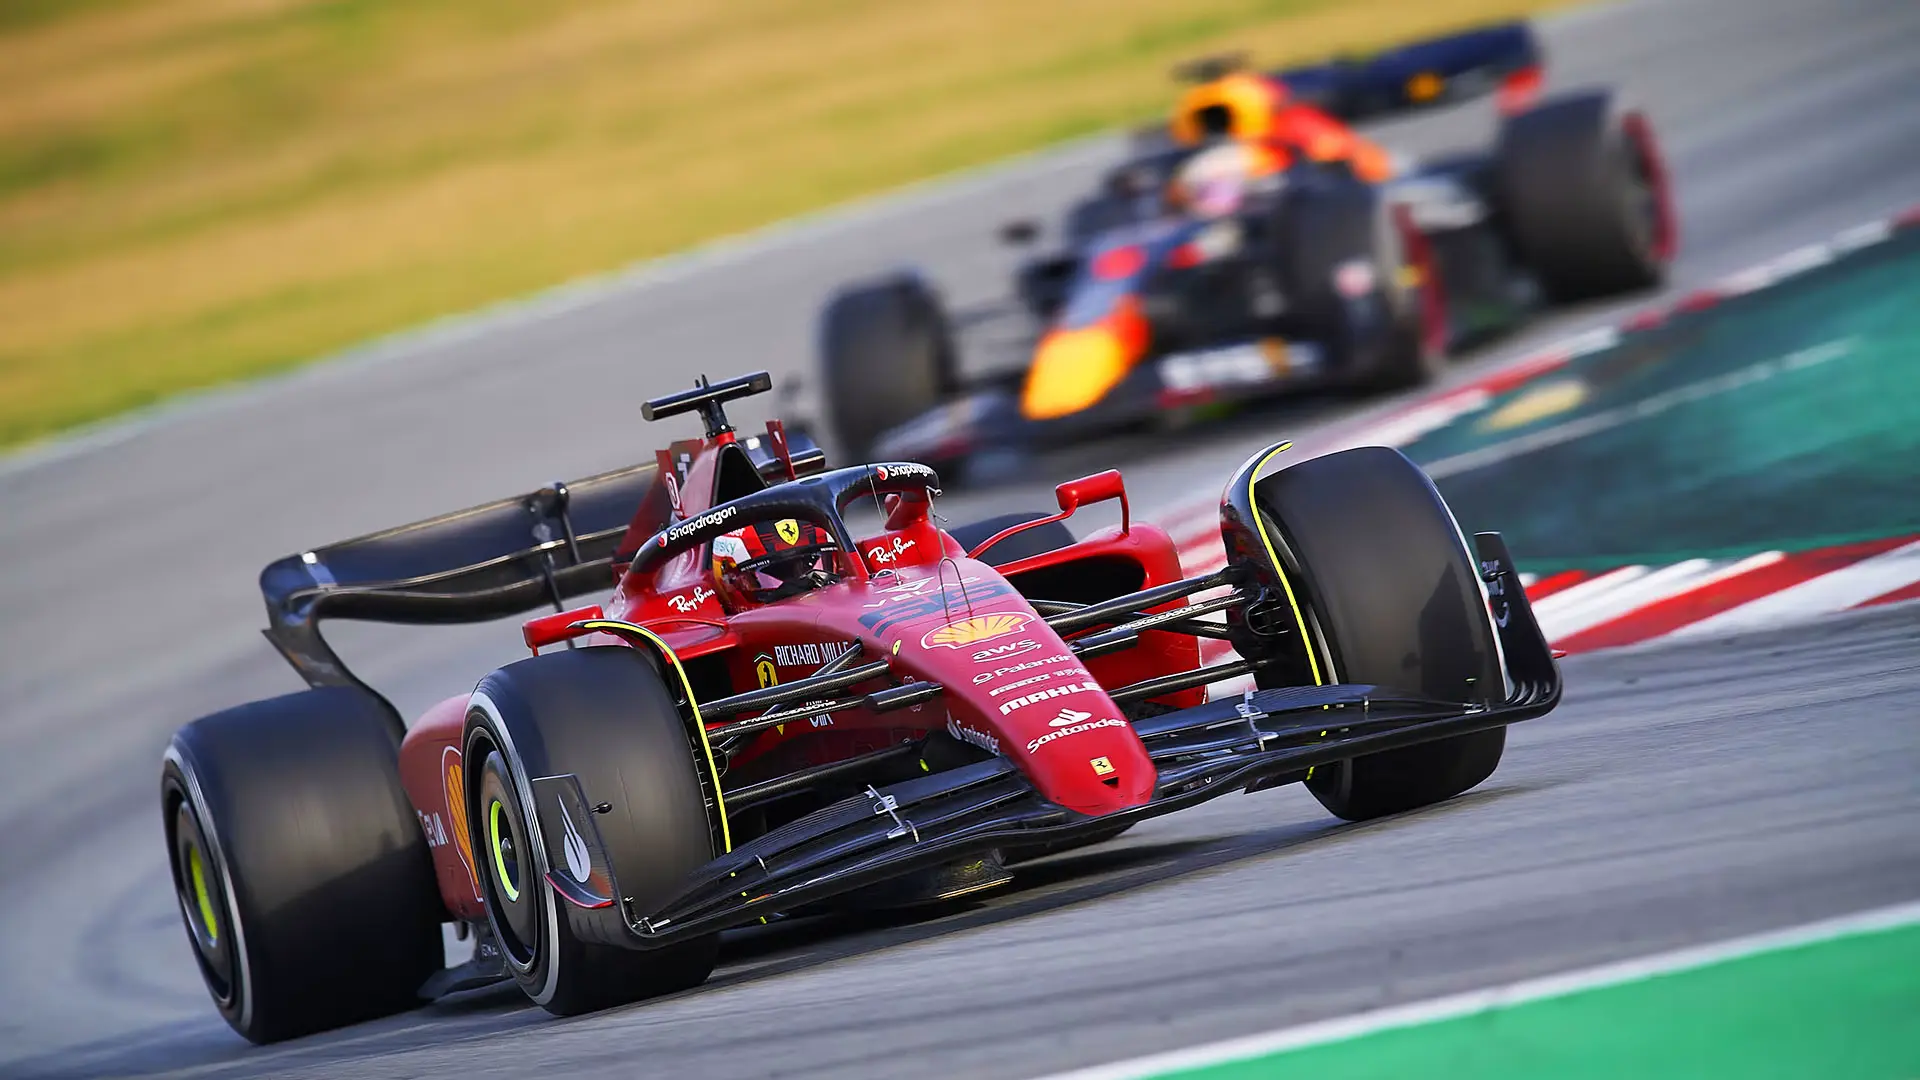 F1 In Madrid Fever Grips Announcement Set for January 23rd!